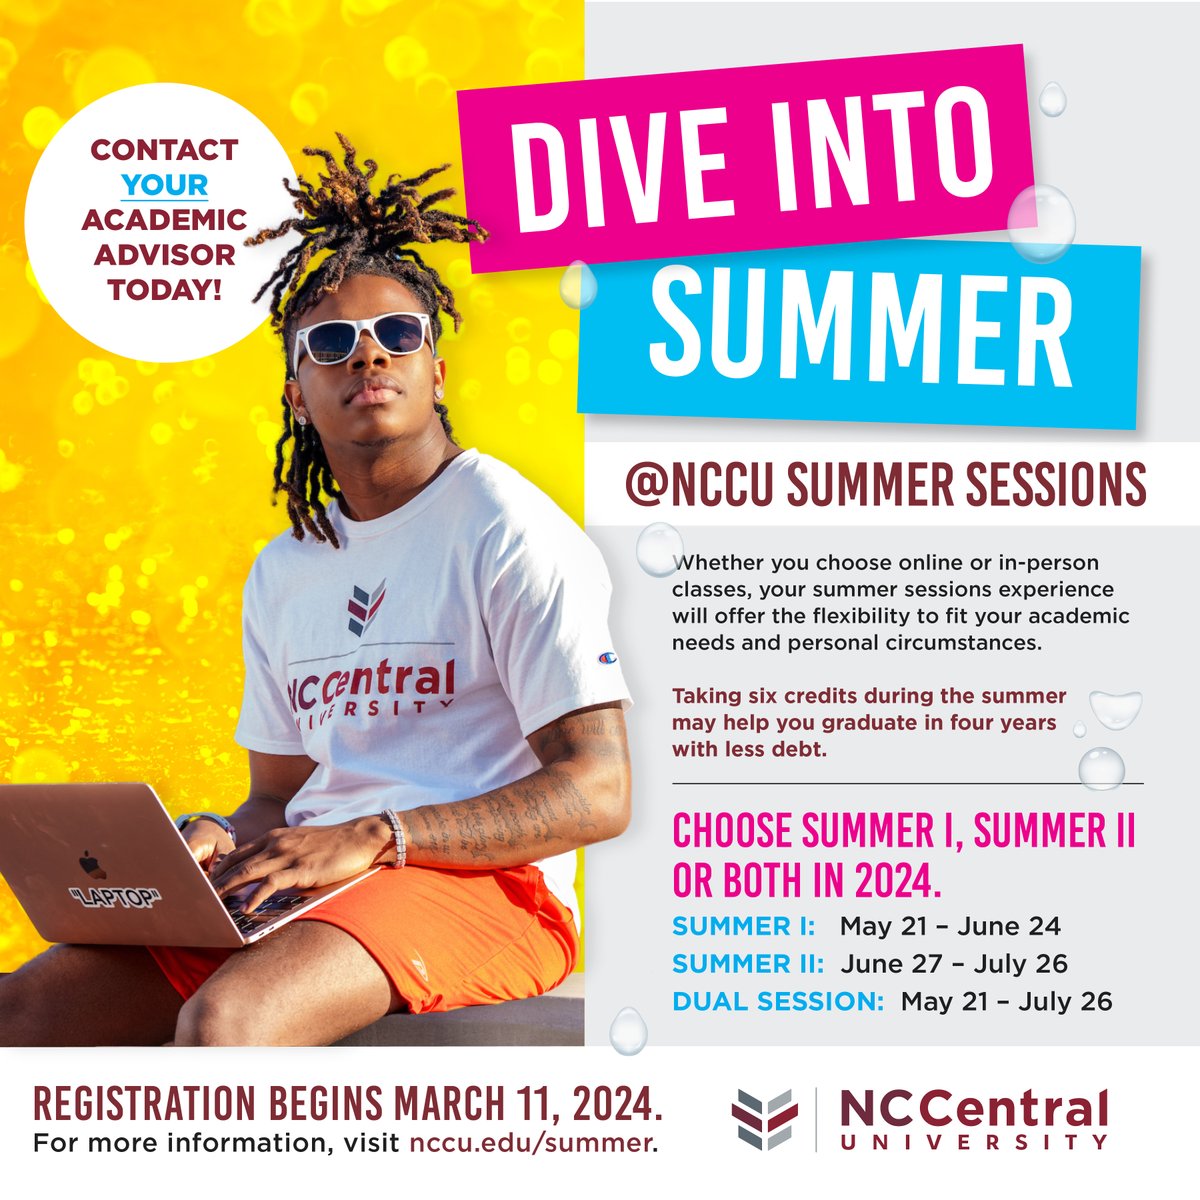 #NCCULife | Dive into summer at NCCU! Enroll in up to six credit hours to fast-track graduation and save on tuition. Choose from one or both summer sessions to best fit your schedule. Registration starts March 11, 2024 at nccu.edu/summer. | #NCCUTake6 #EaglePromise